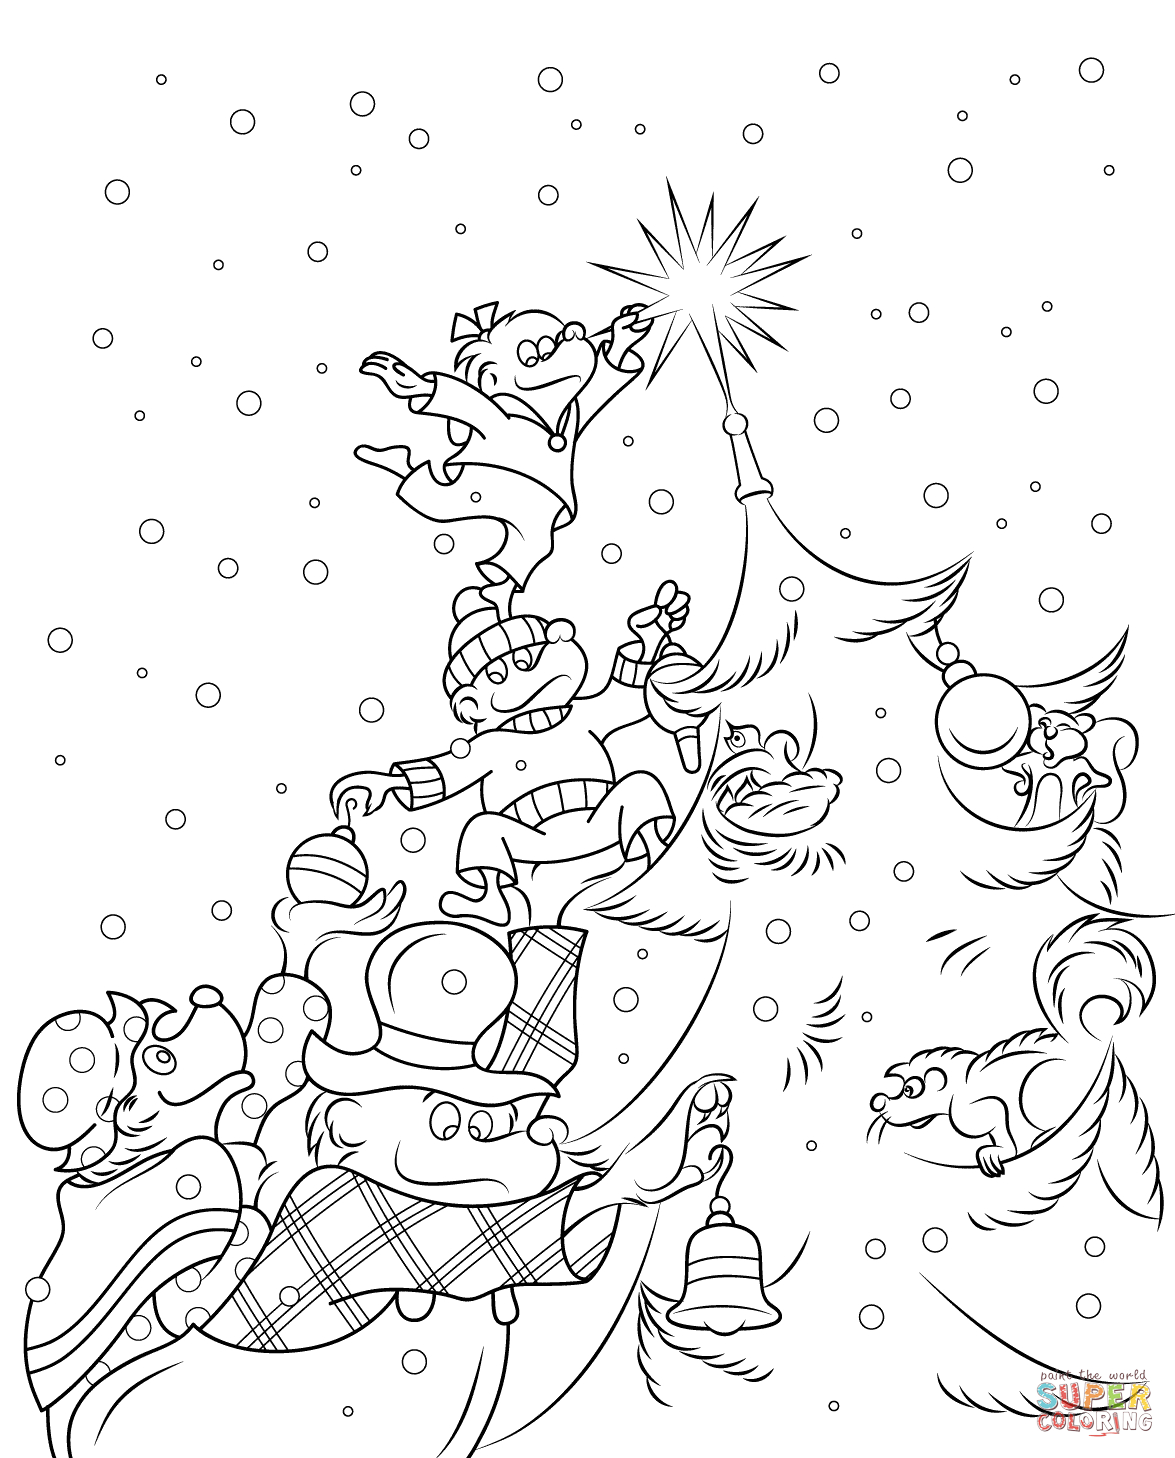 Berenstain Bears Coloring Pages The Berenstain Bears Christmas Tree Coloring Page Free Printable